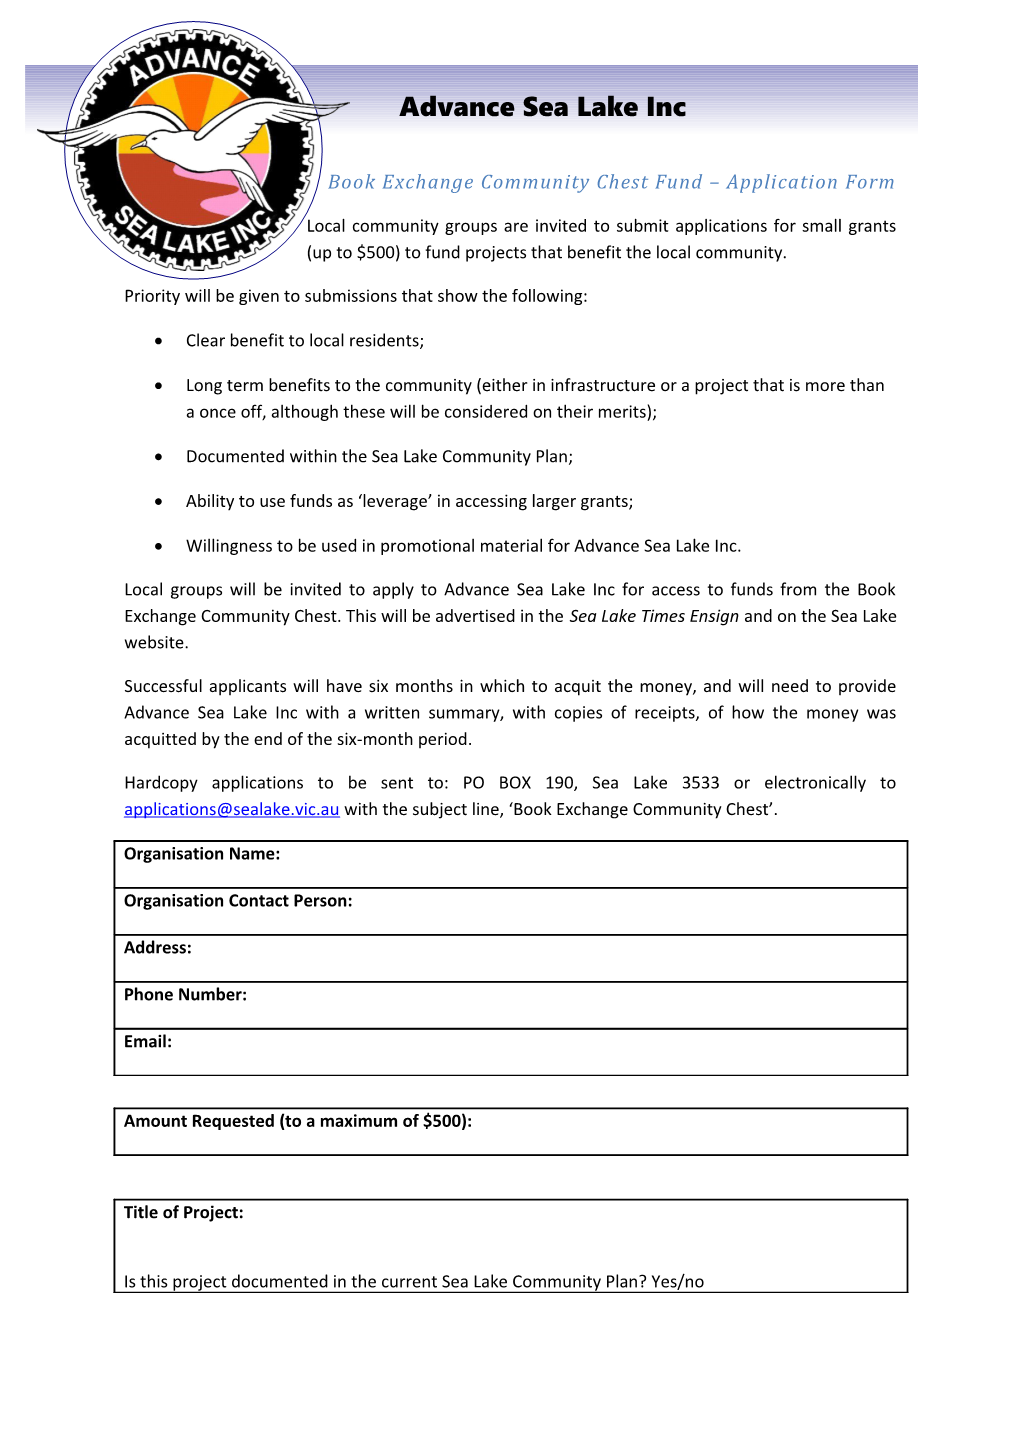 Book Exchange Community Chest Fund Application Form